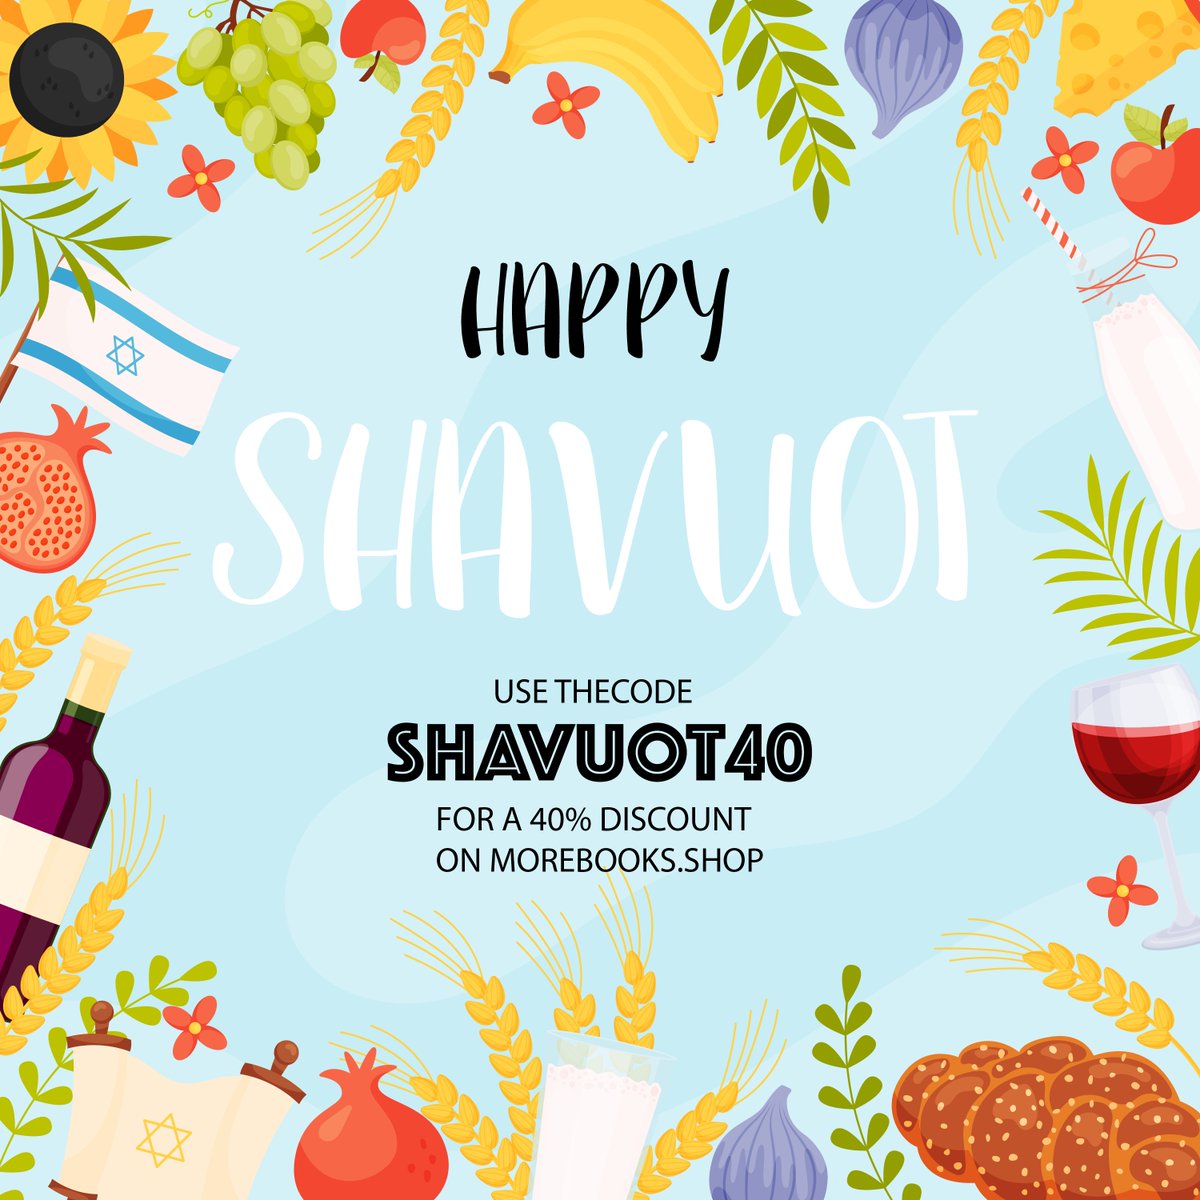 ✨ Today Jews all over the world celebrate the last day of Shavuot also known as “feast of weeks” which commemorates the revelation of the Torah on Mt. Sinai to the Jewish people. Chag Sameach! 🥳 P.S. 🤫 Use the code SHAVUOT40 for a 40% discount on: morebooks.shop